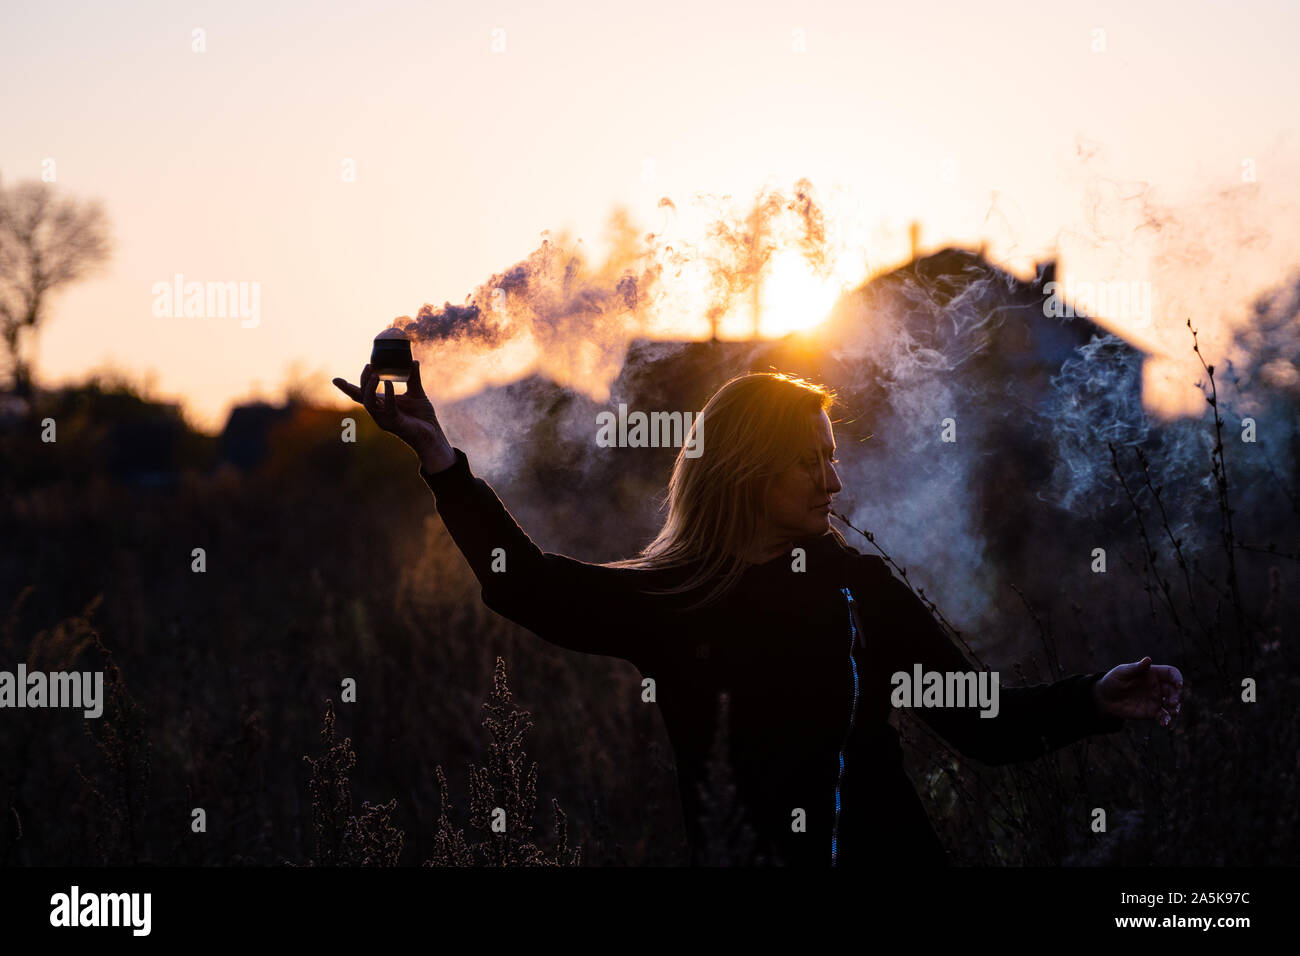 a woman with long hair holds a smoking bowl in her hand. portrait at sunset. allegory of magic, freedom, protest Stock Photo